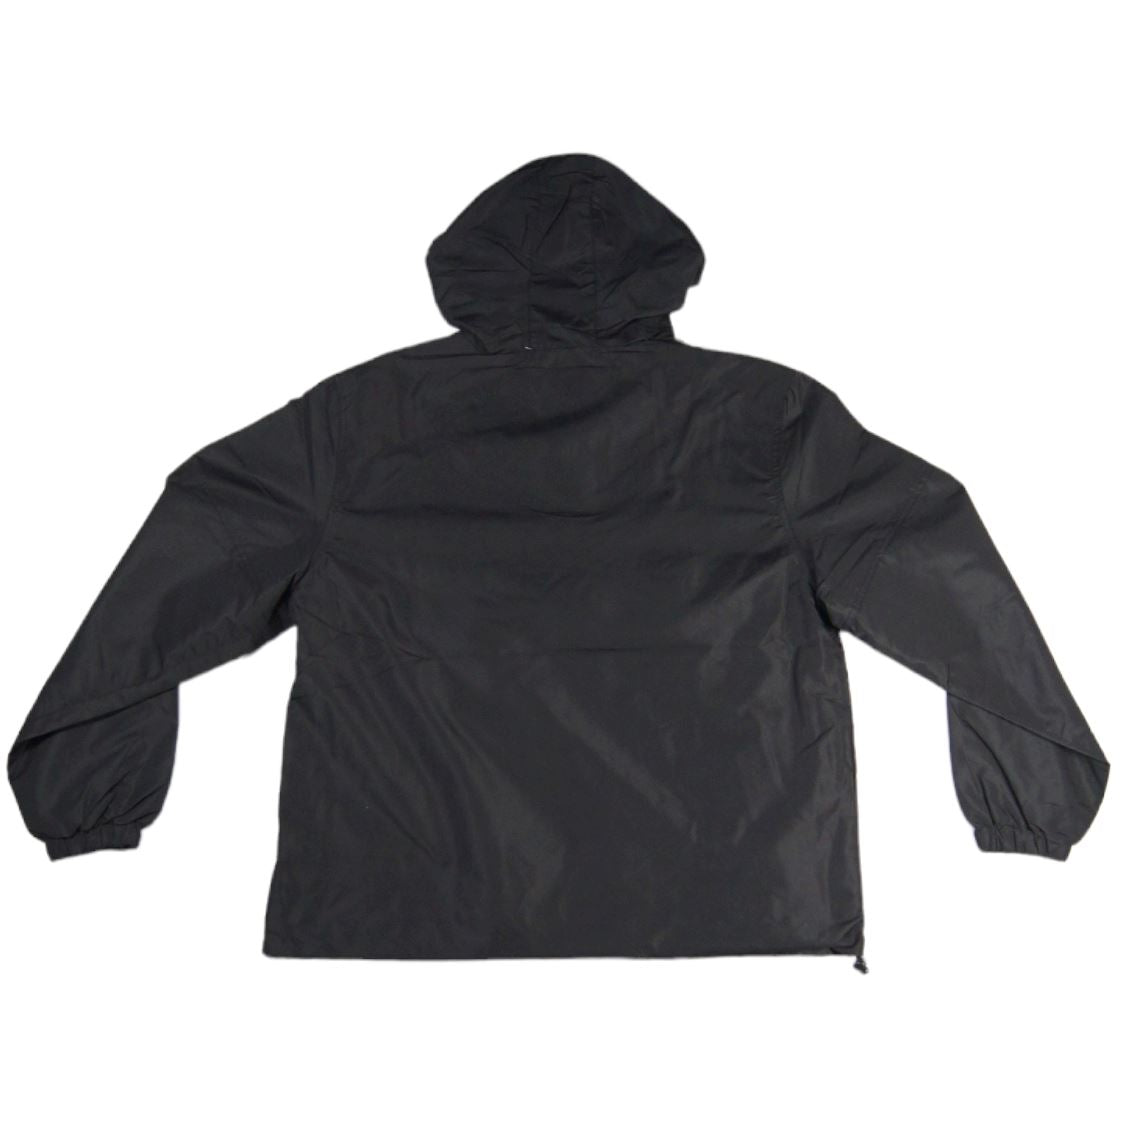 The Alternative Store 1/4 Zip Jacket Coach and Jackets The Alternative Store 